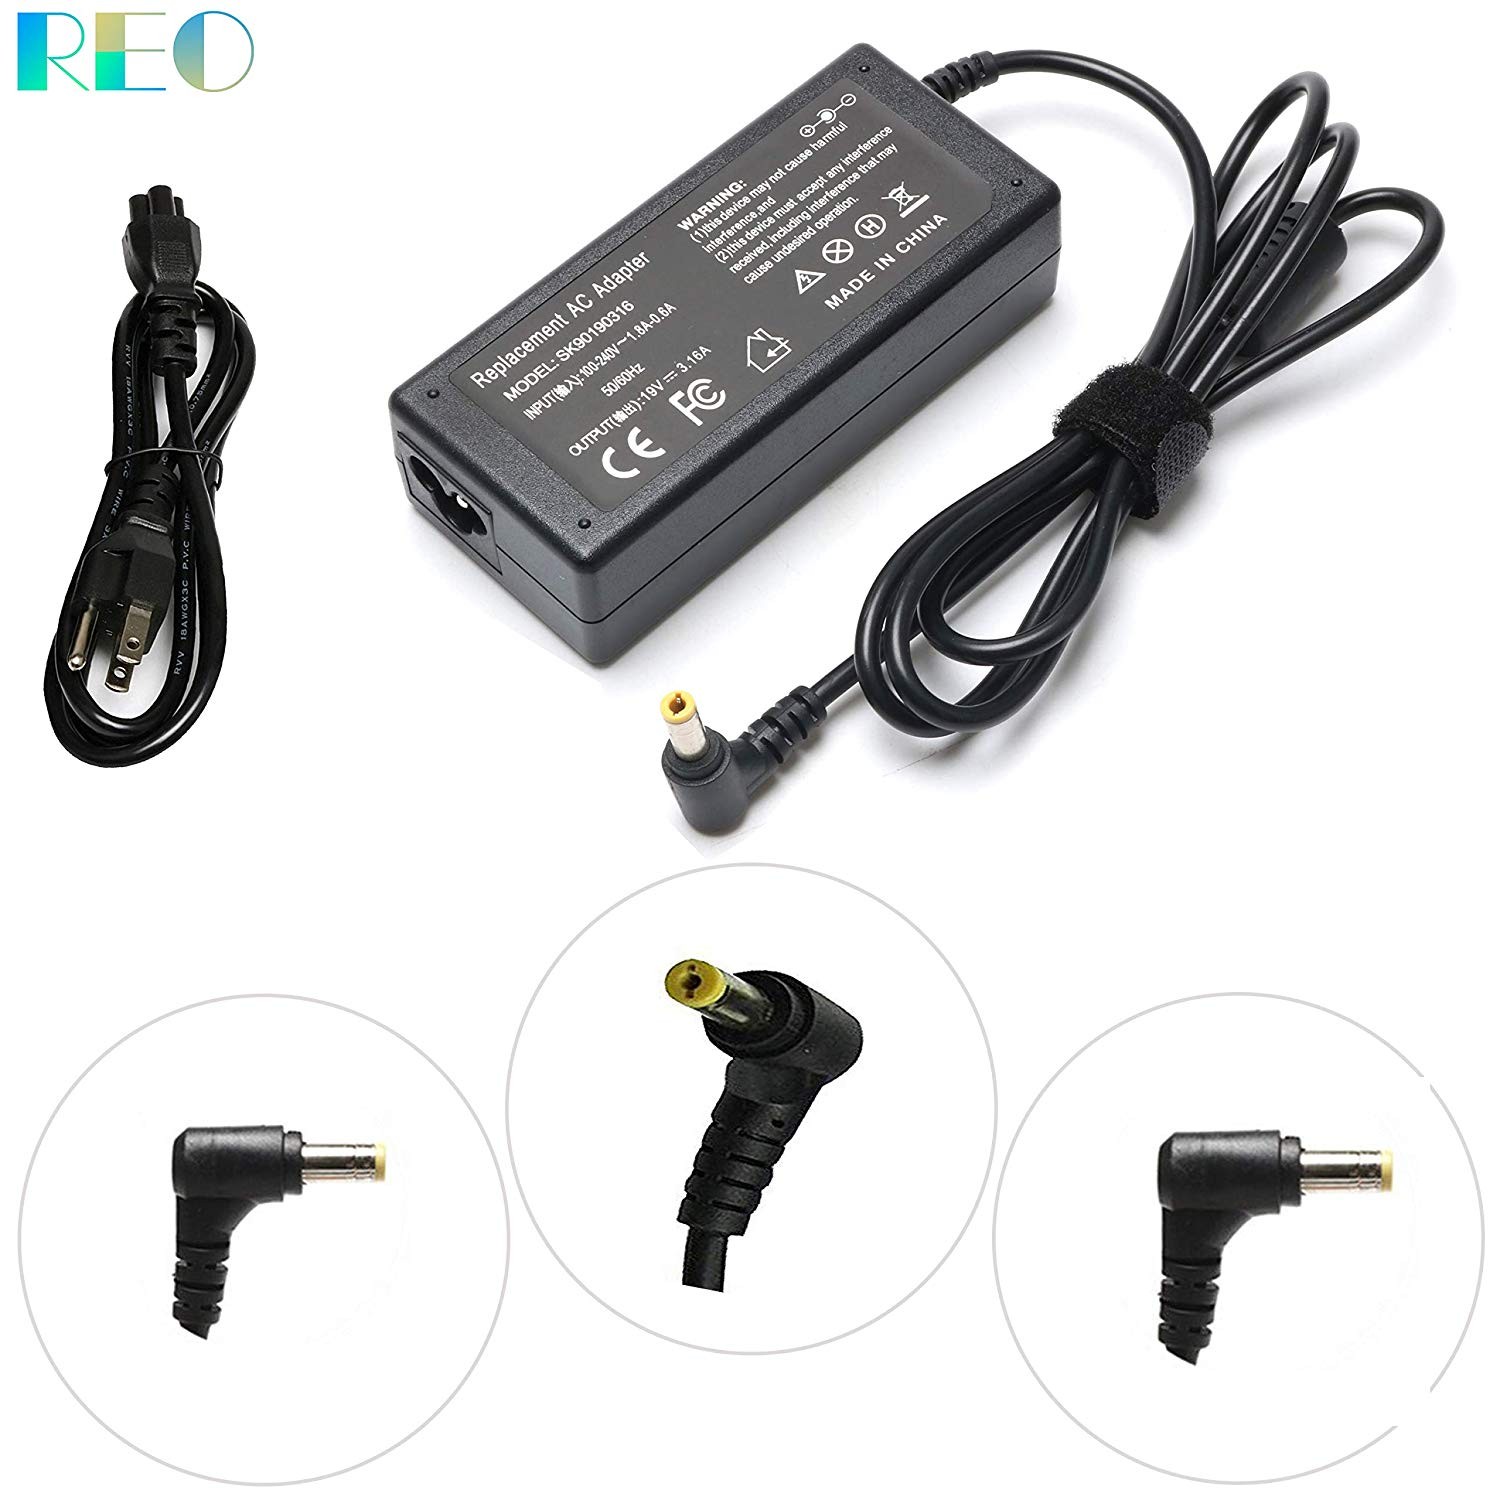 AC Adapter Charger for Toshiba Satellite C55DT C55T C75 C75D C50 C55 C55D C650D C655D C850D C855 C855D C875D C55 B5240X C55 C5241 C55 A5100 C55T A5222